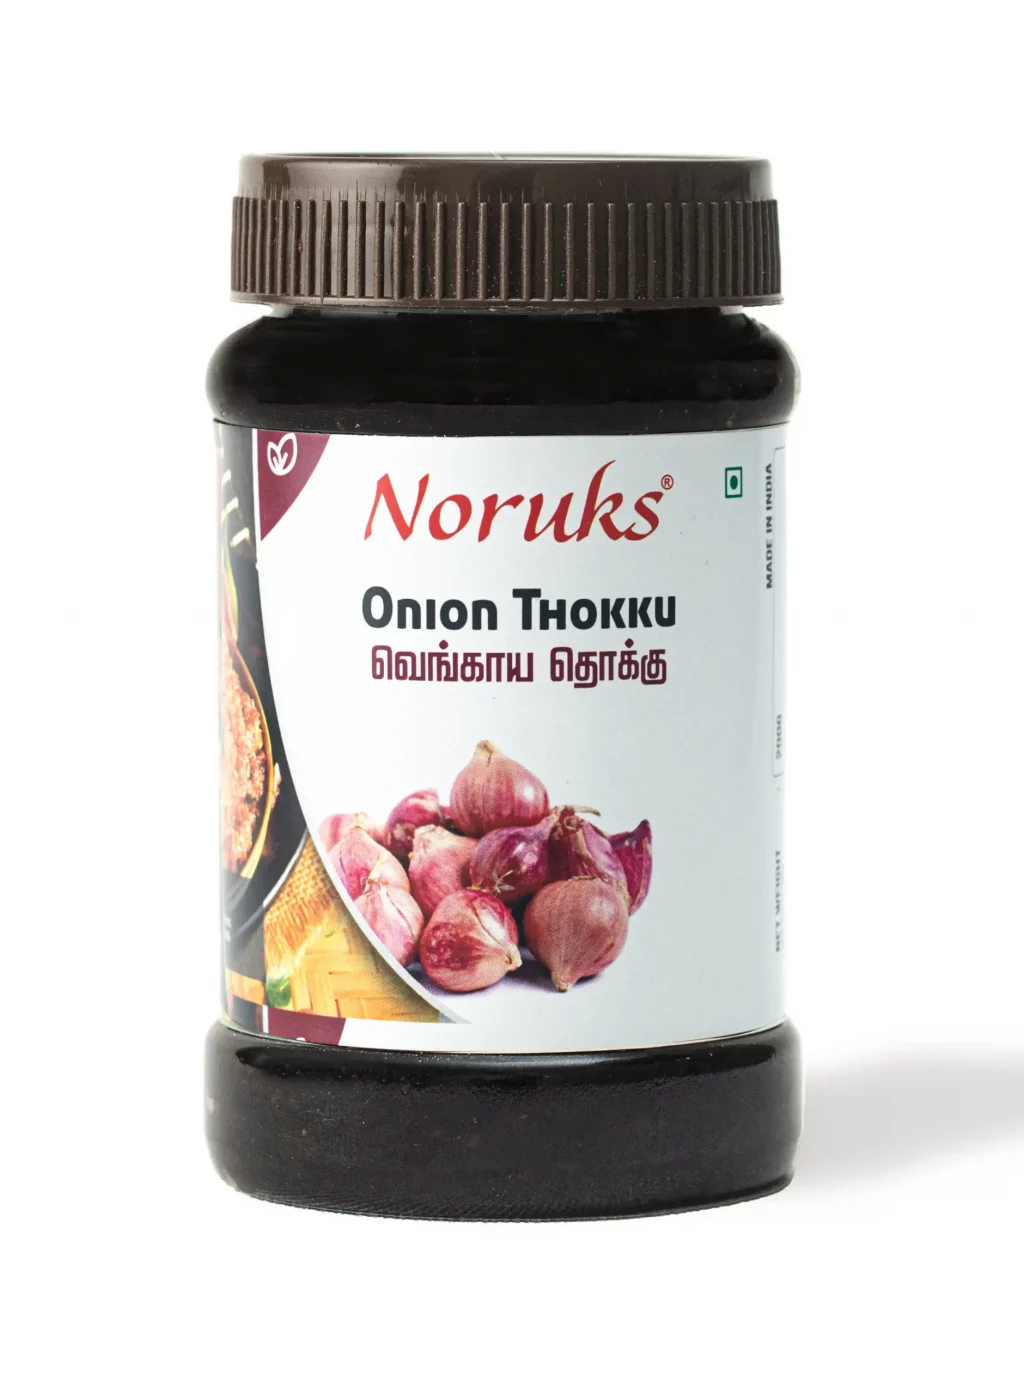 Buy Delicious Onion Thokku From Noruks Online - Healthy Indian Snack